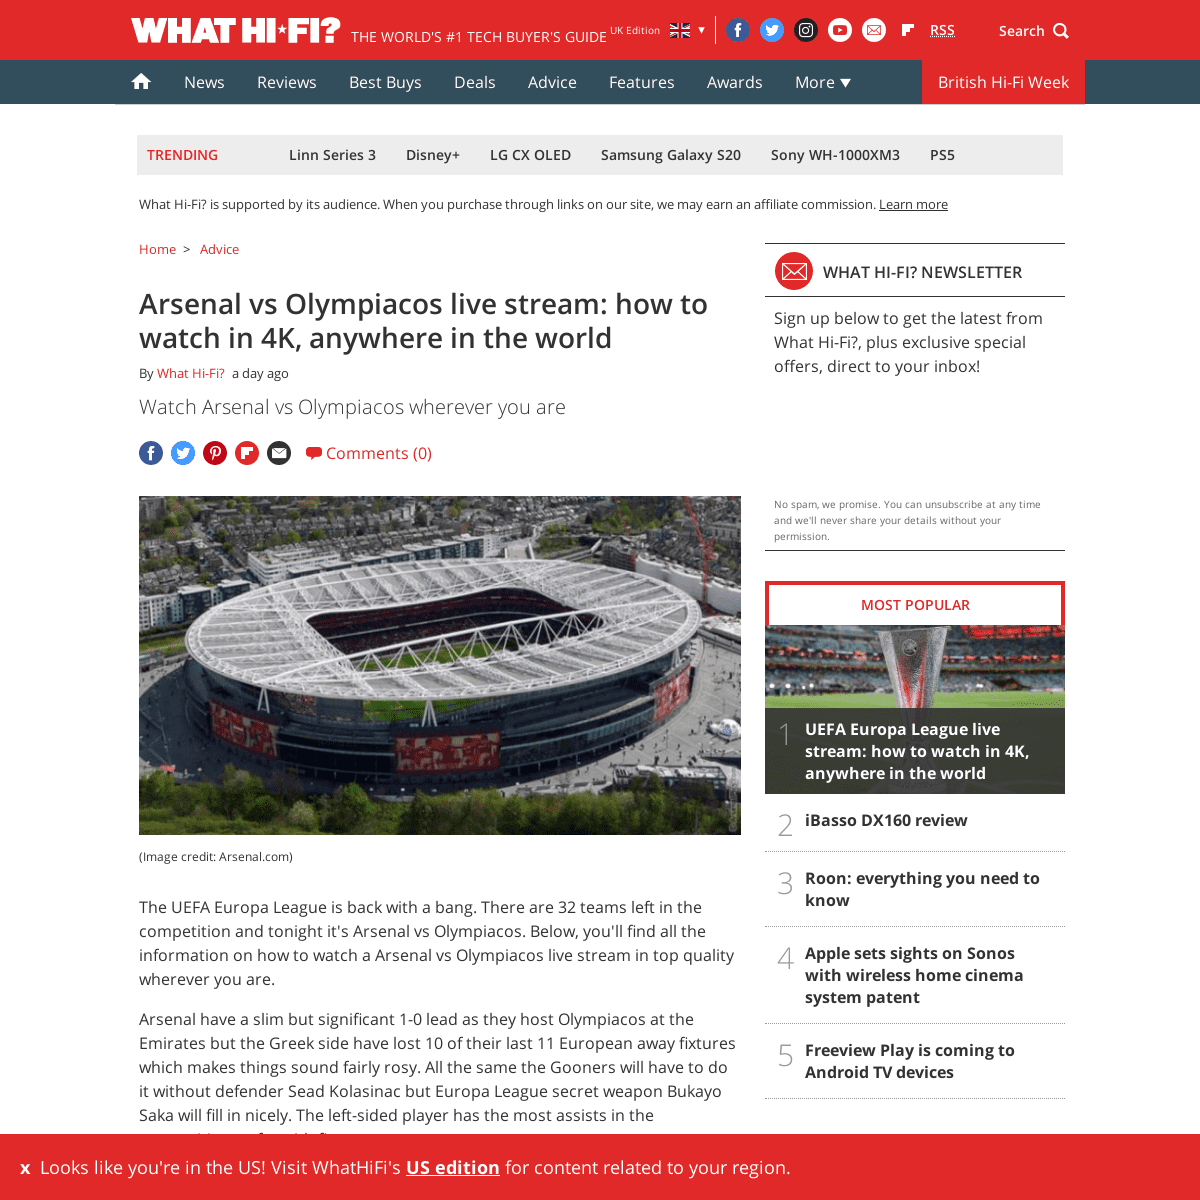 A complete backup of www.whathifi.com/advice/arsenal-vs-olympiacos-live-stream-how-to-watch-in-4k-anywhere-in-the-world